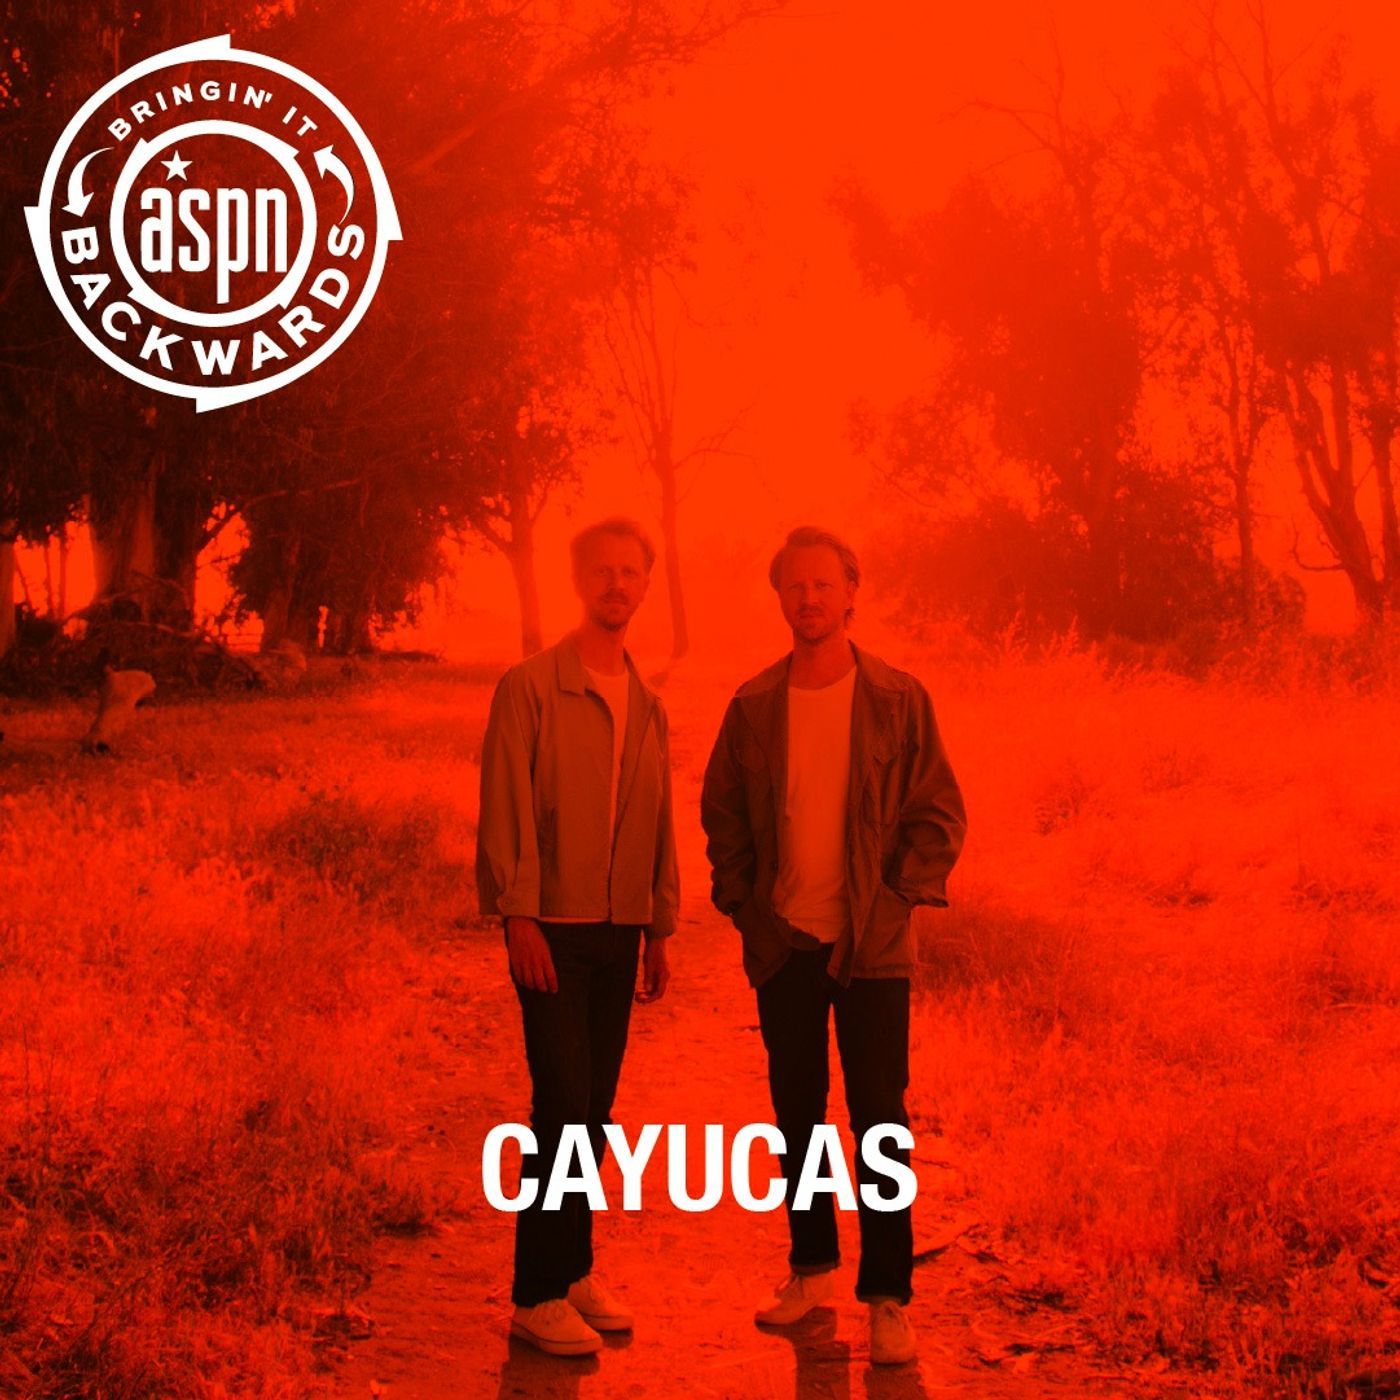 Interview with Cayucas Image